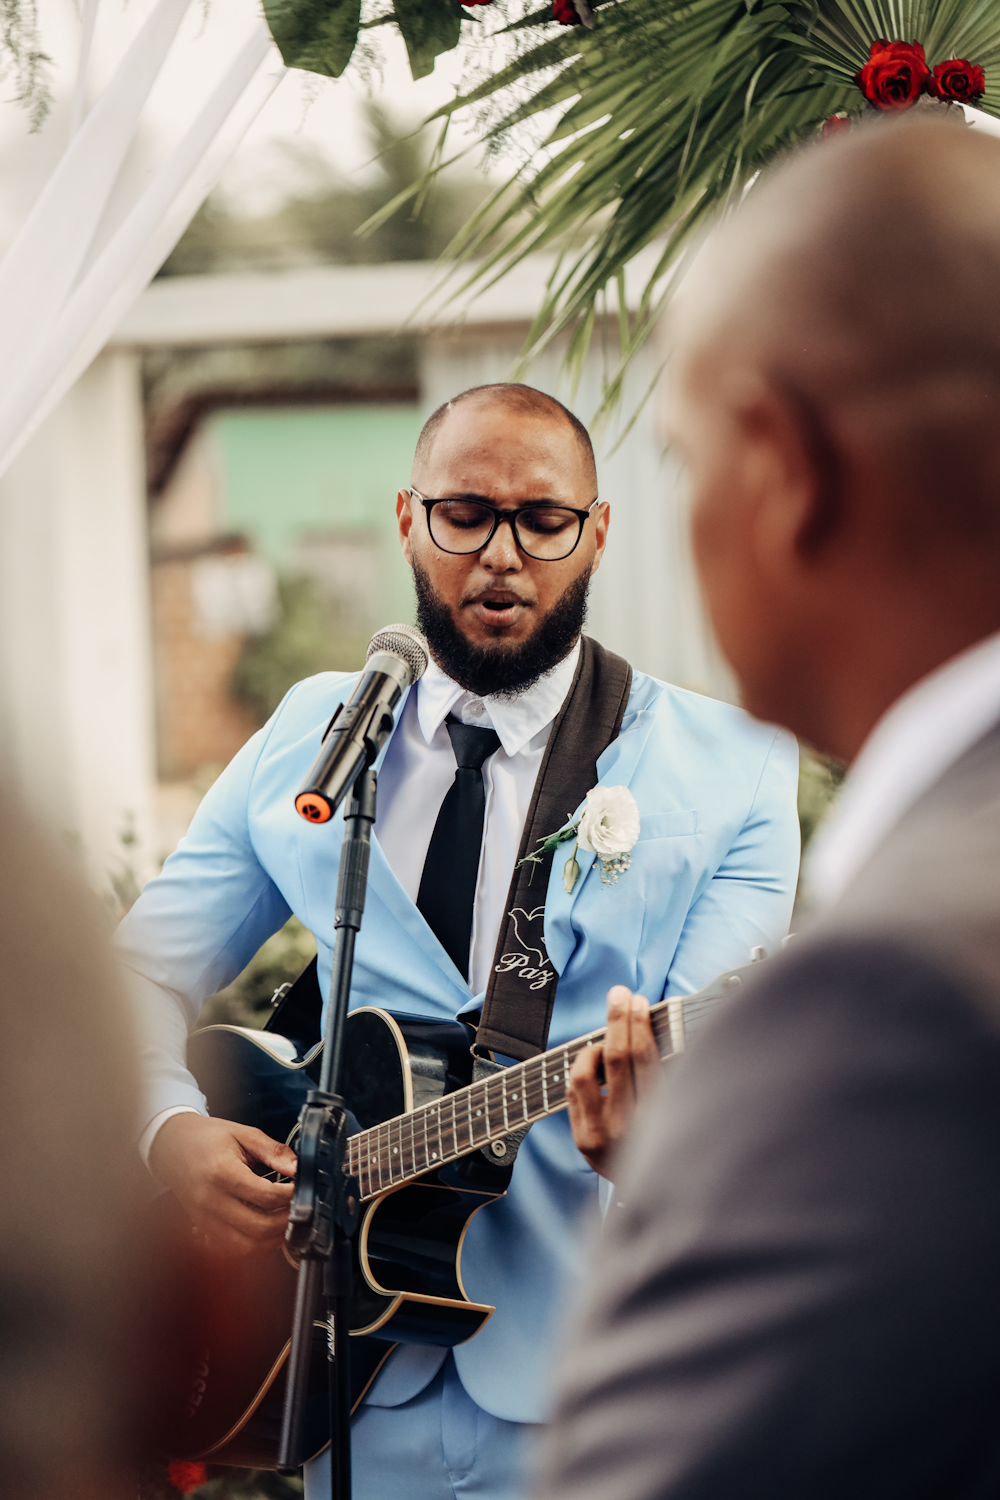 a man in a suit and tie playing a guitar